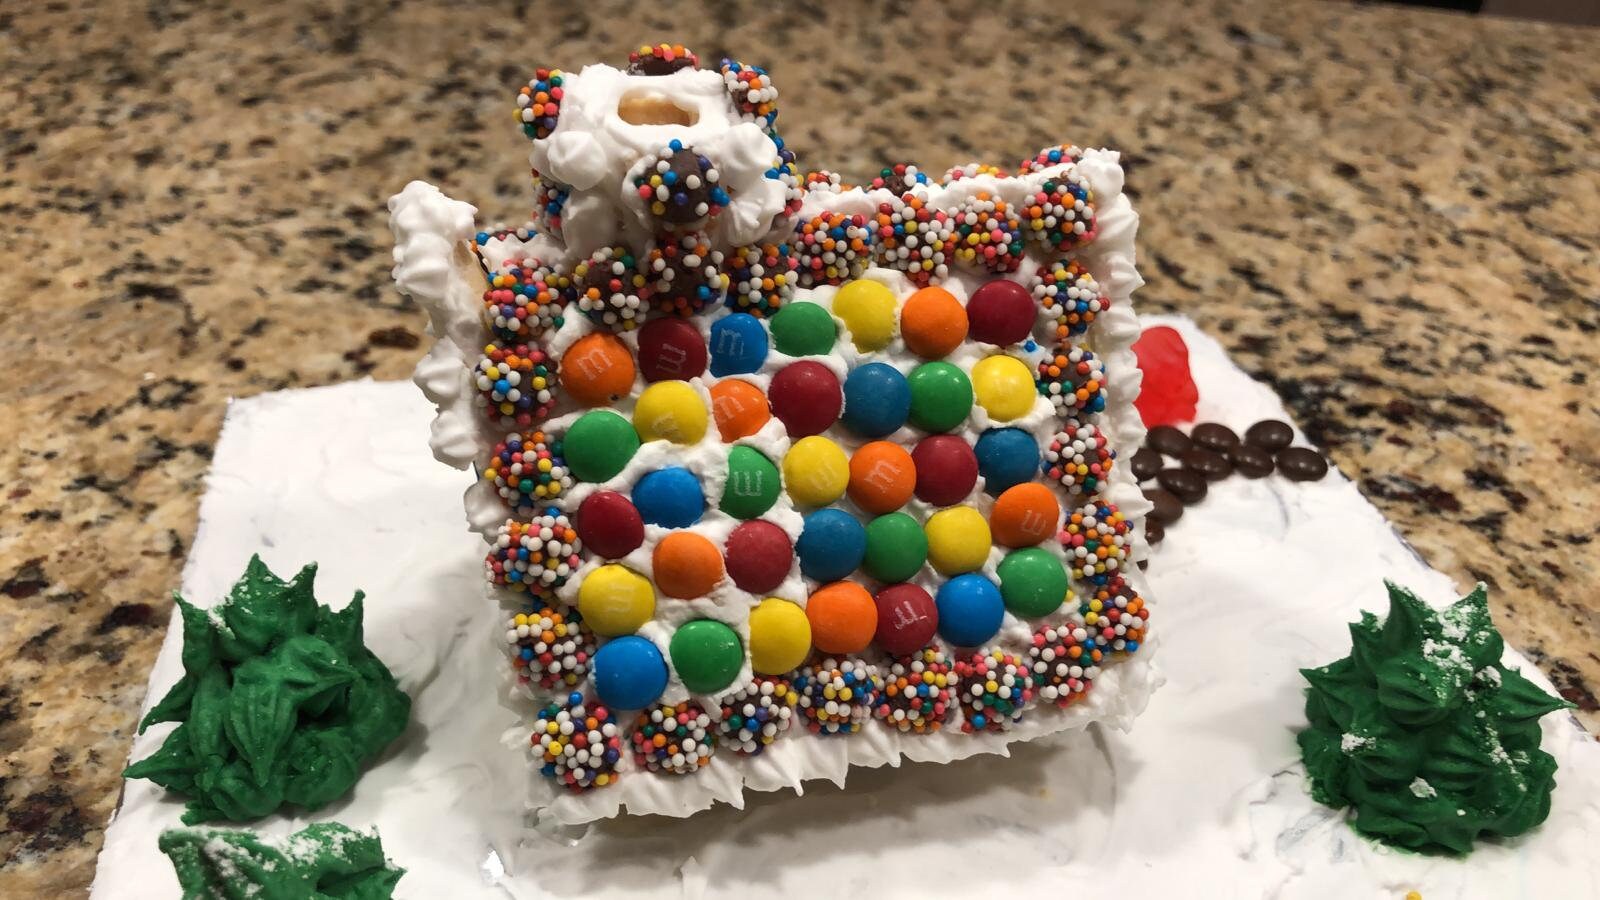 Christmas Gingerbread House Pattern - Medium  (7.5" x 4.5" x 6.0"). Gingerbread House Patterns, Recipes, Tips & Tricks In One Package!